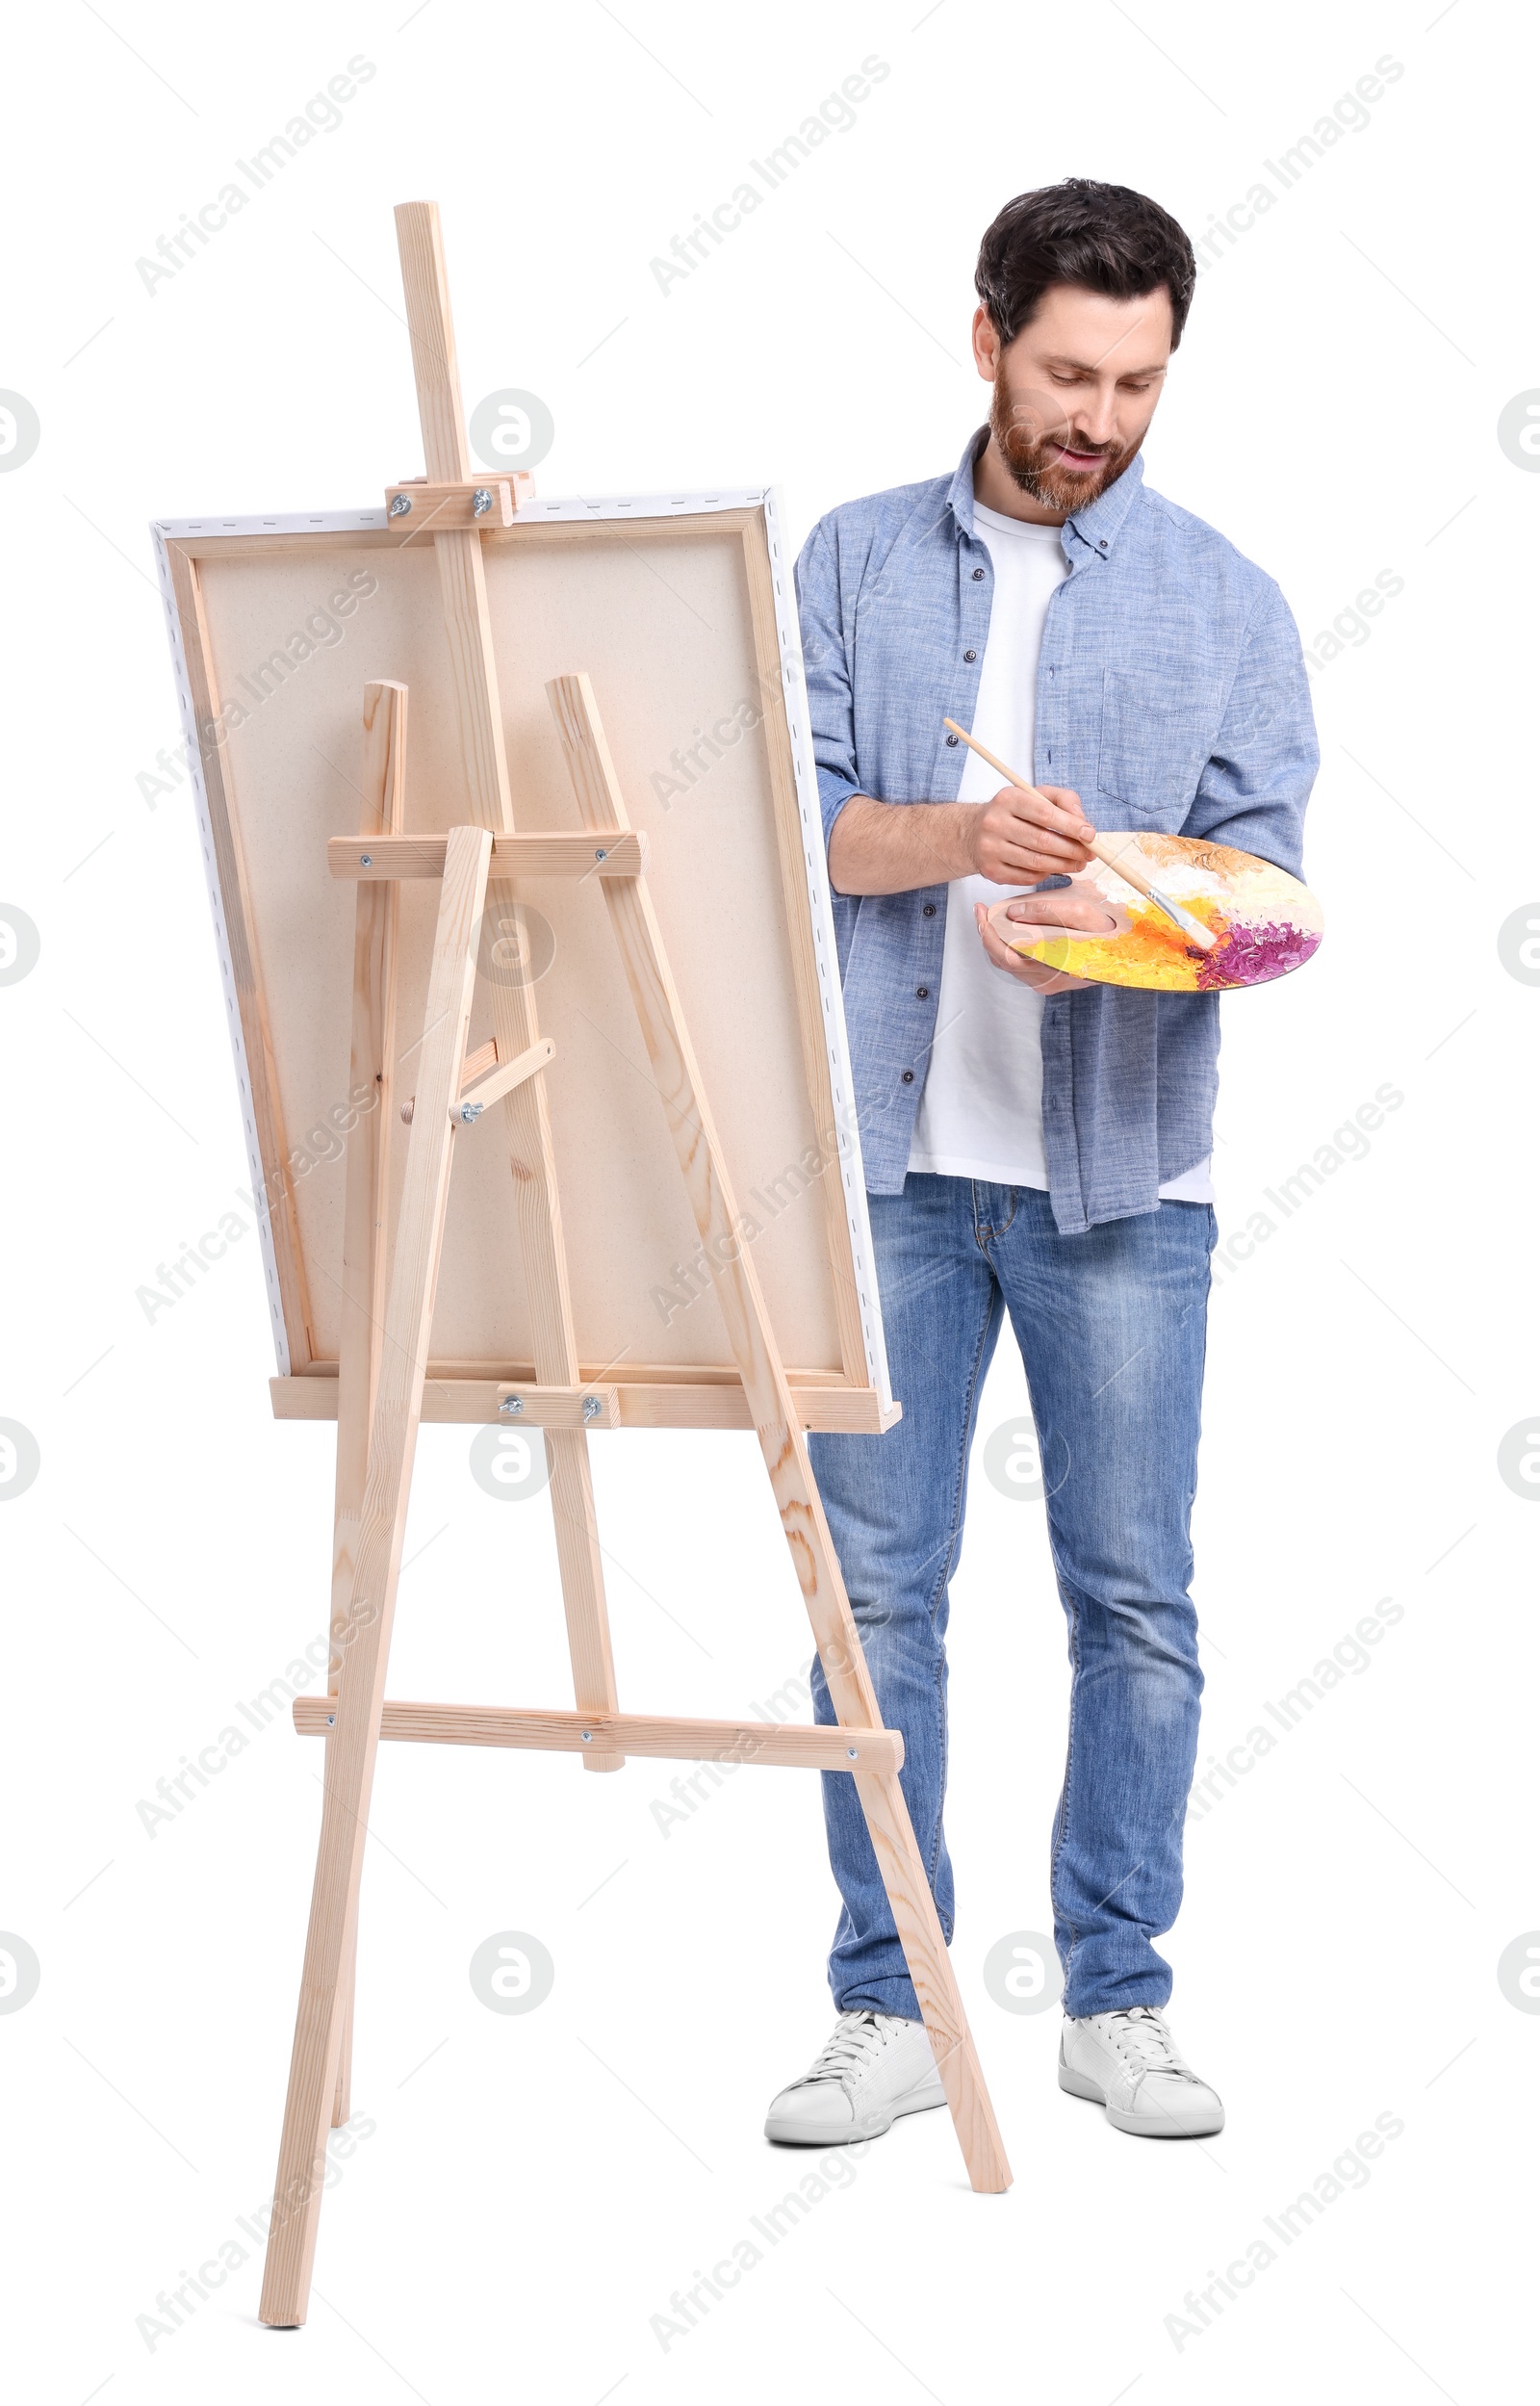 Photo of Man painting with brush against white background. Using easel to hold canvas